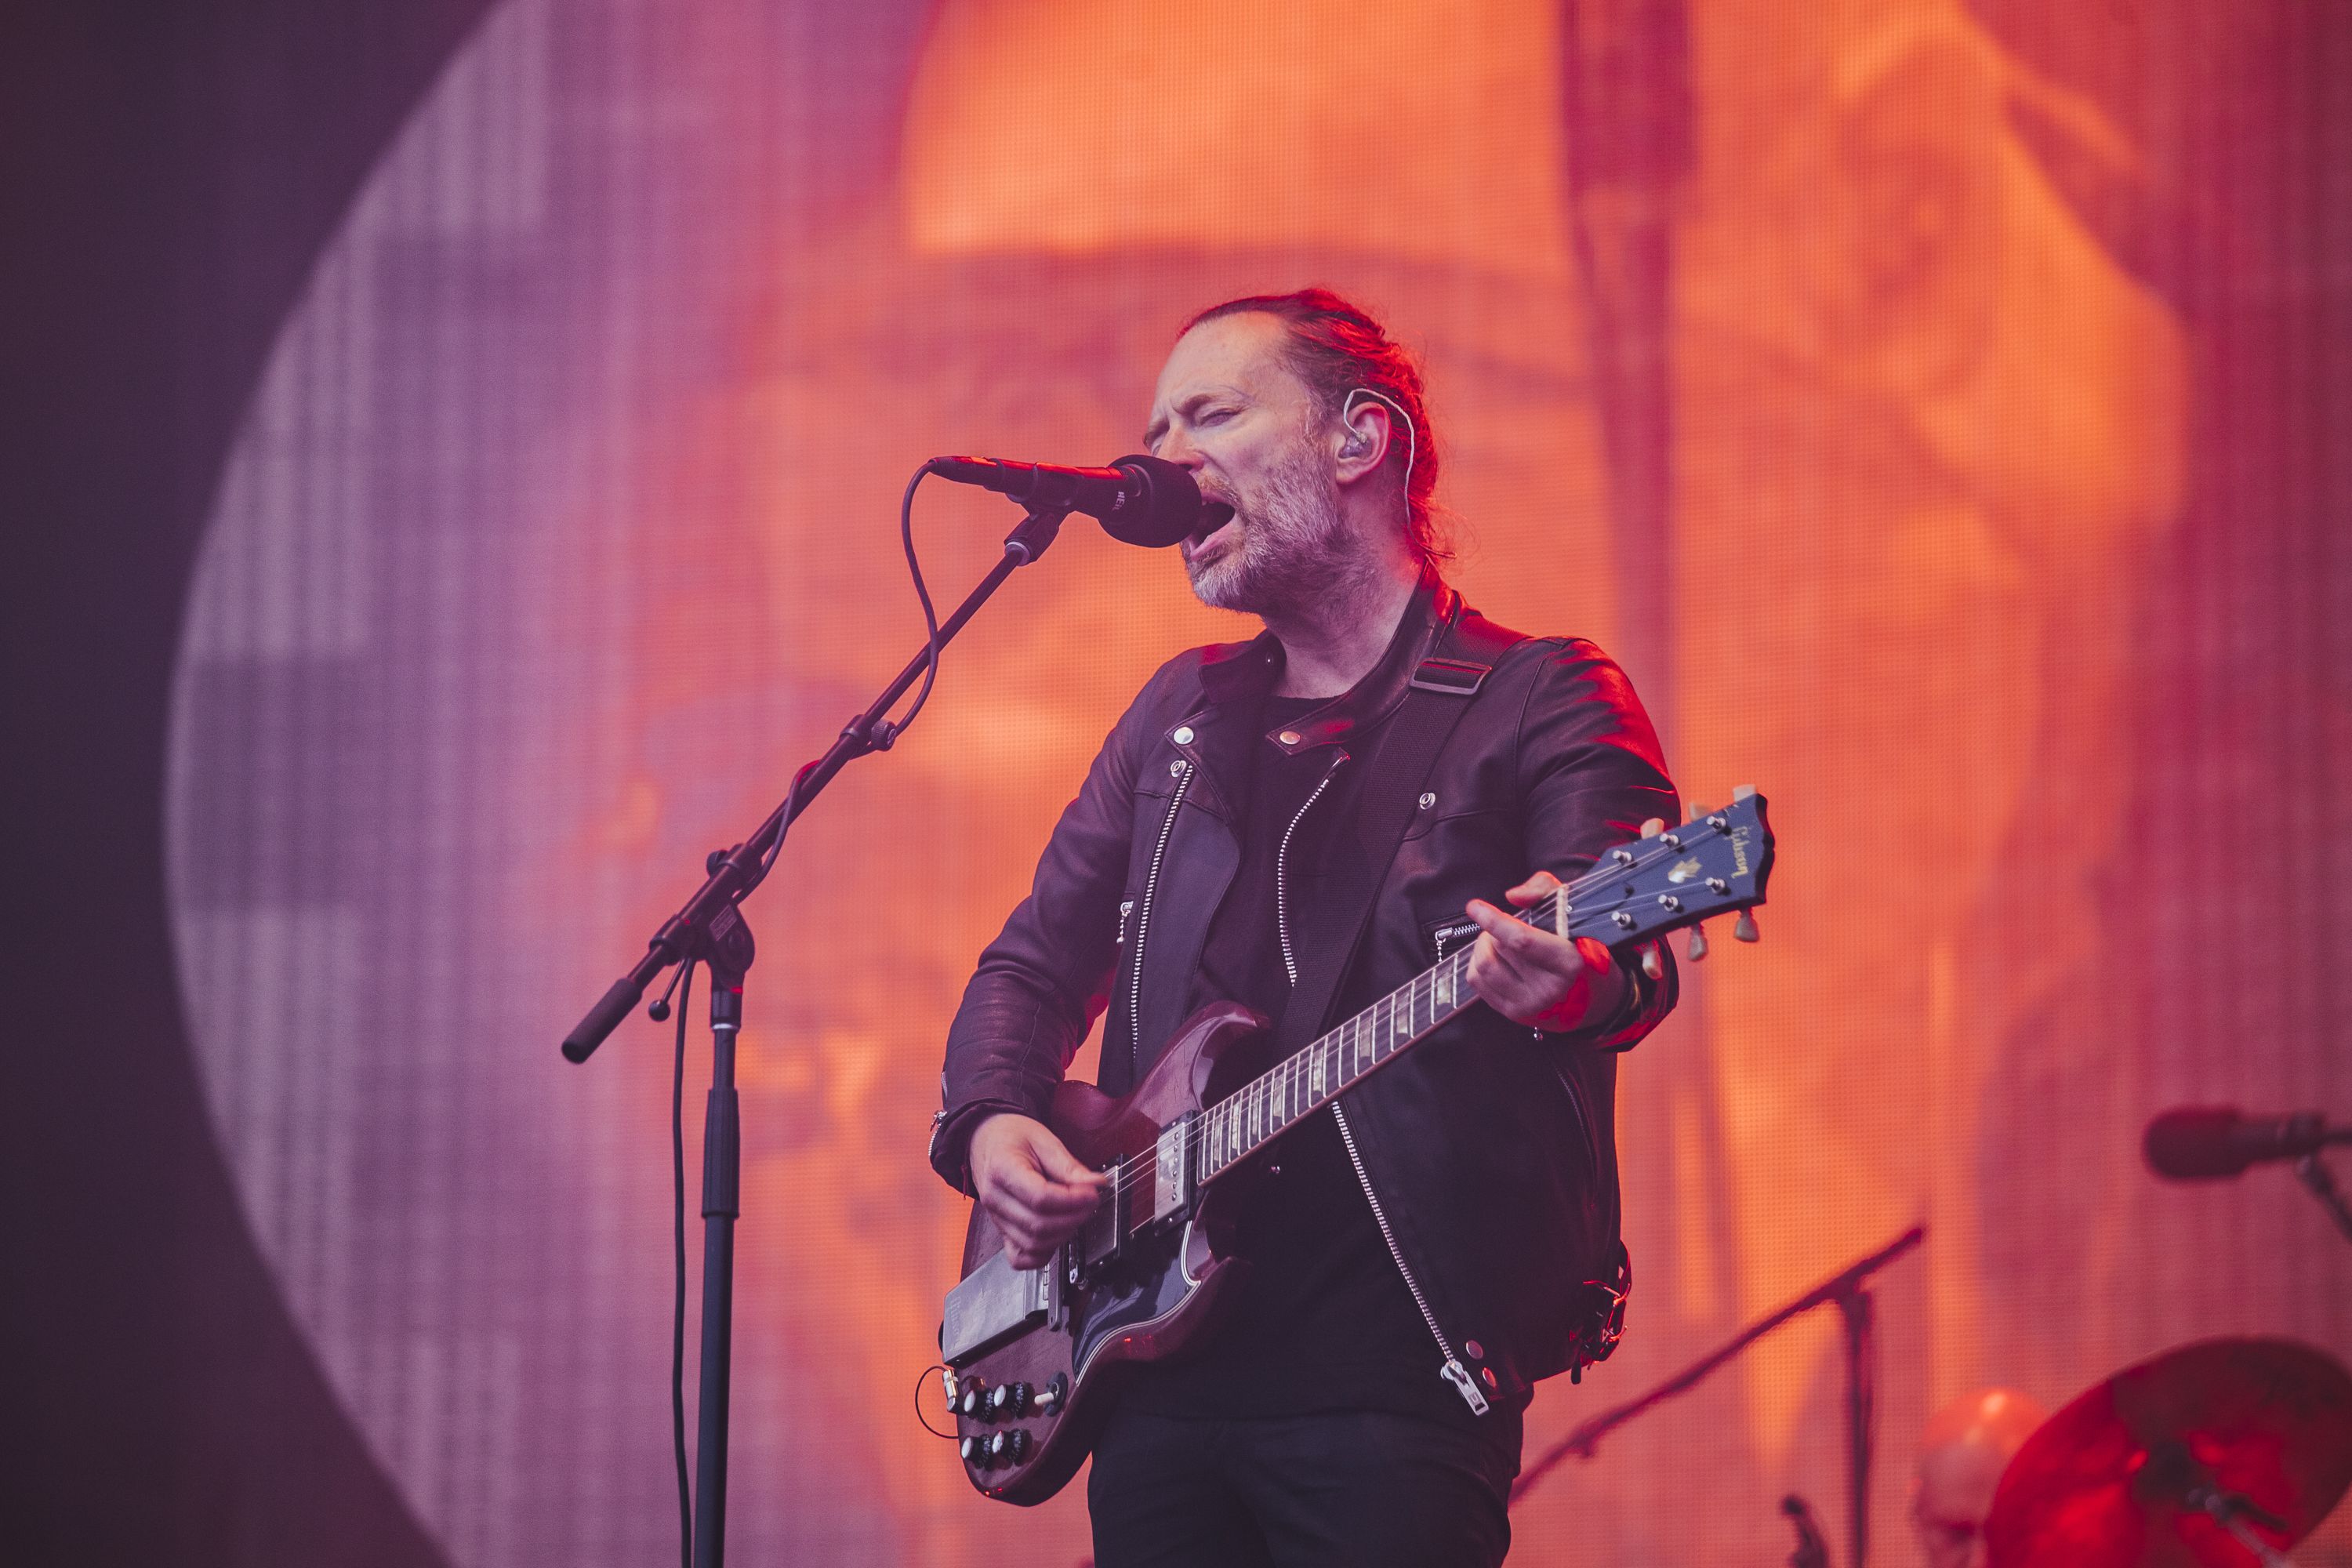 Hackers stole unreleased Radiohead music, asked for $150,000 ransom